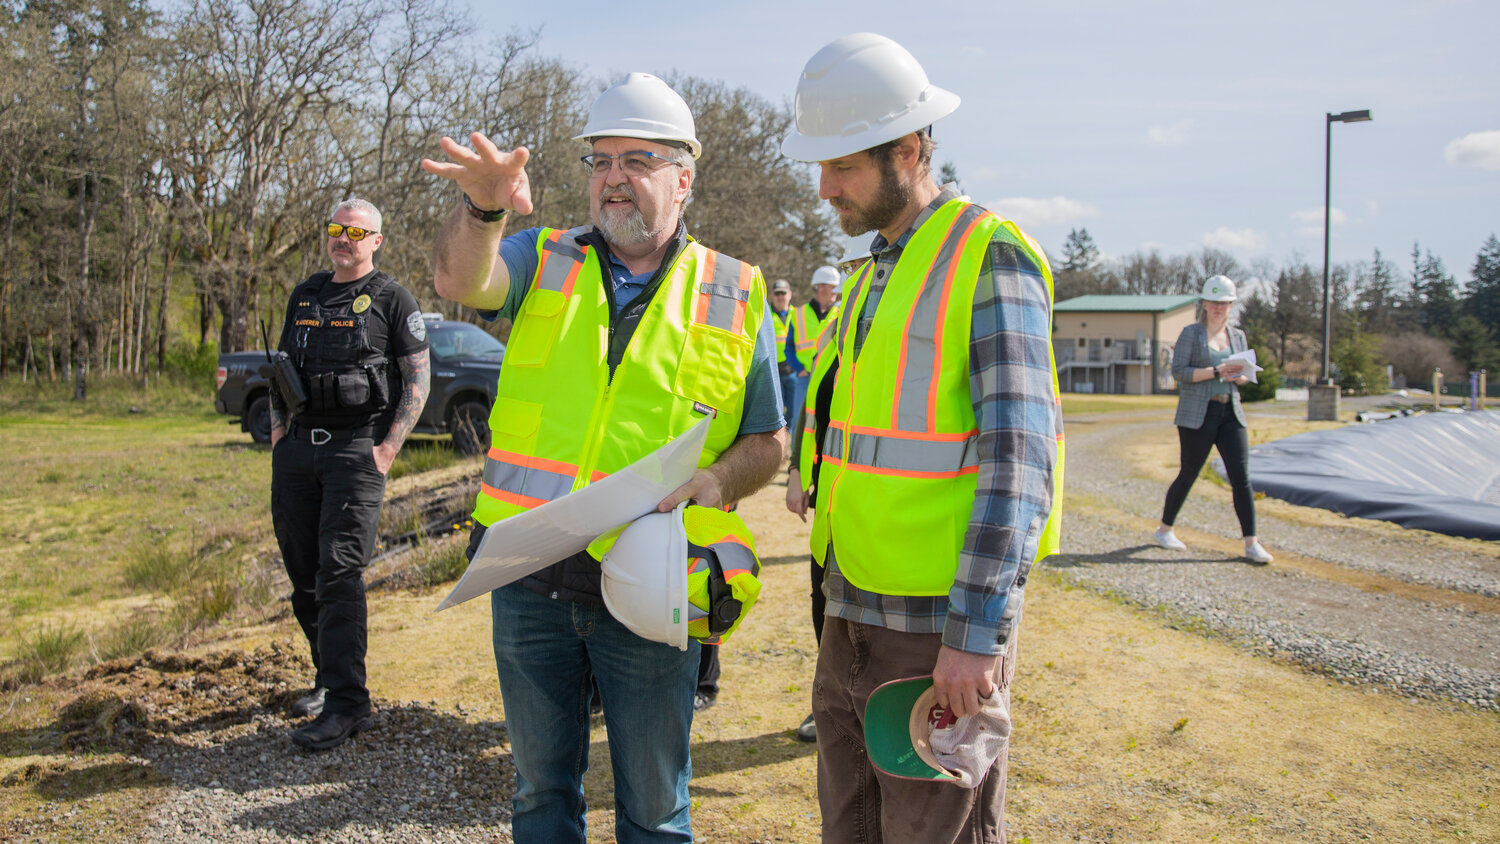 Perry Shea, with Dragonwheel Investment Group Inc. talks about what construction may look like at an agricultural park along Old Highway 99 SE in Tenino on Thursday, April 27, 2023.